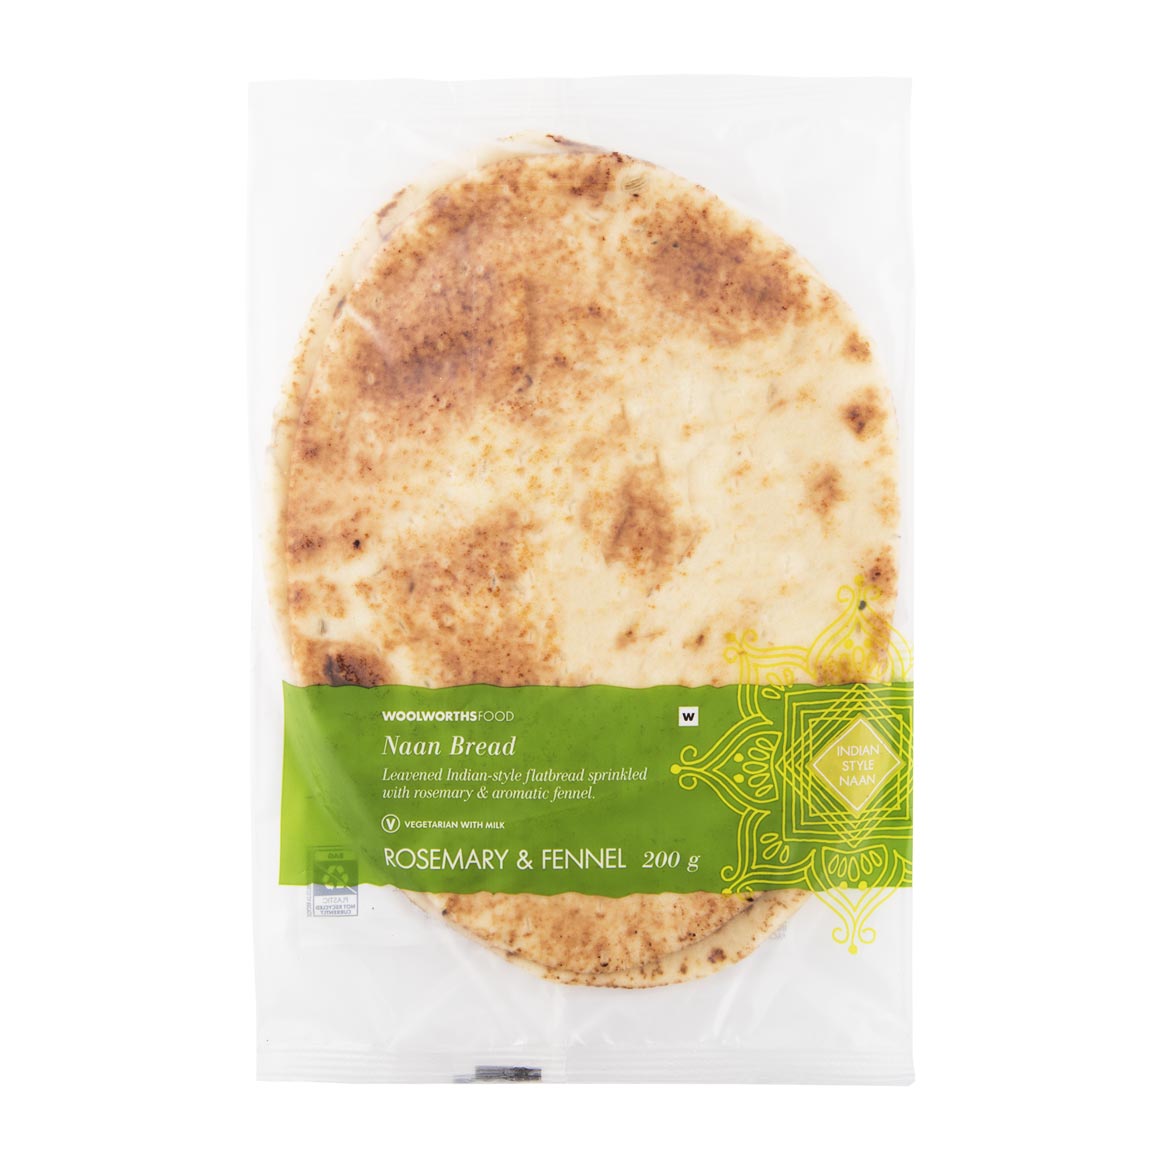 Rosemary & Fennel Naan Bread 200g | Woolworths.co.za